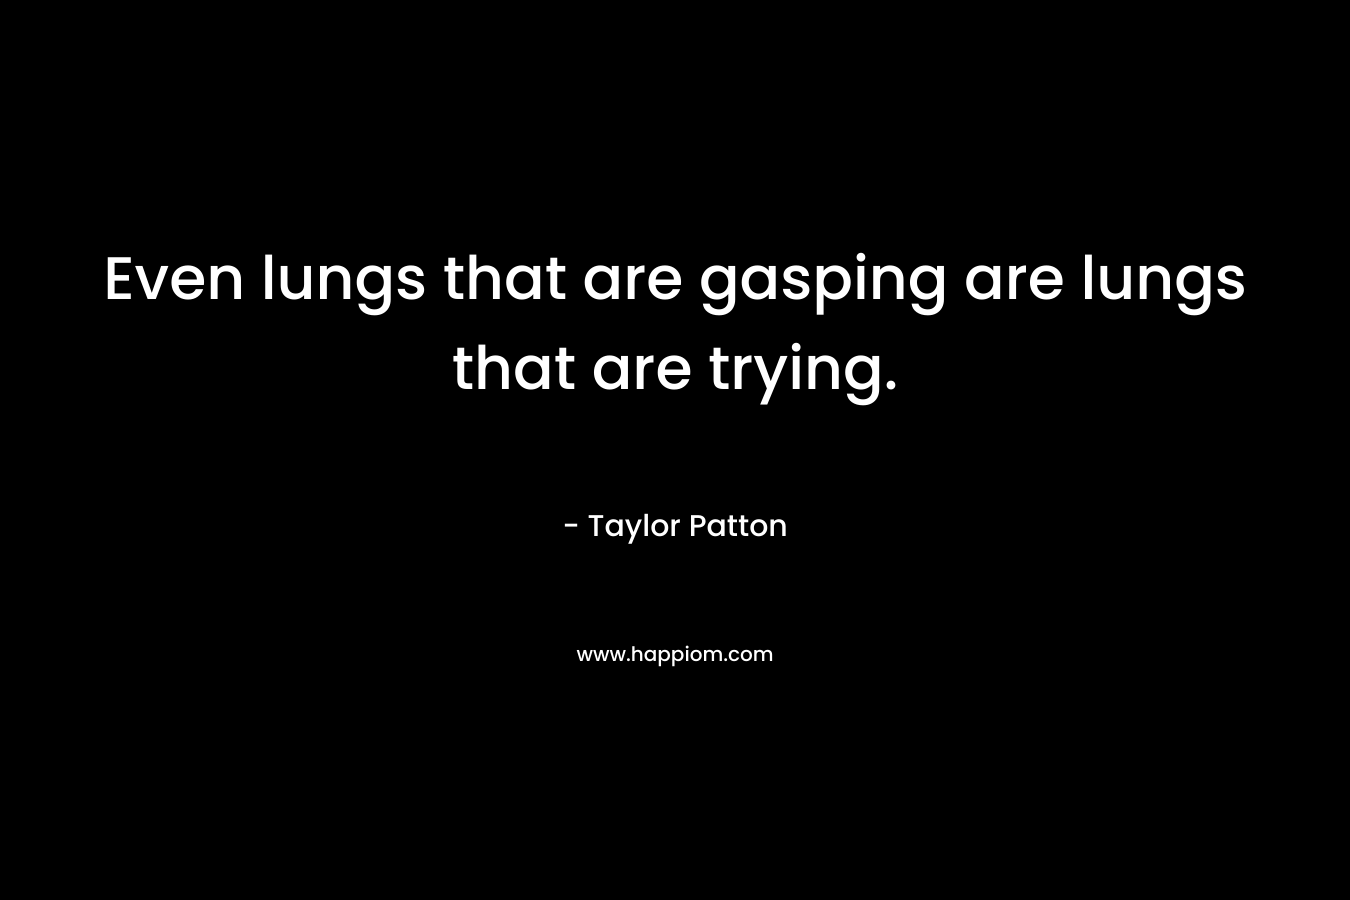 Even lungs that are gasping are lungs that are trying.